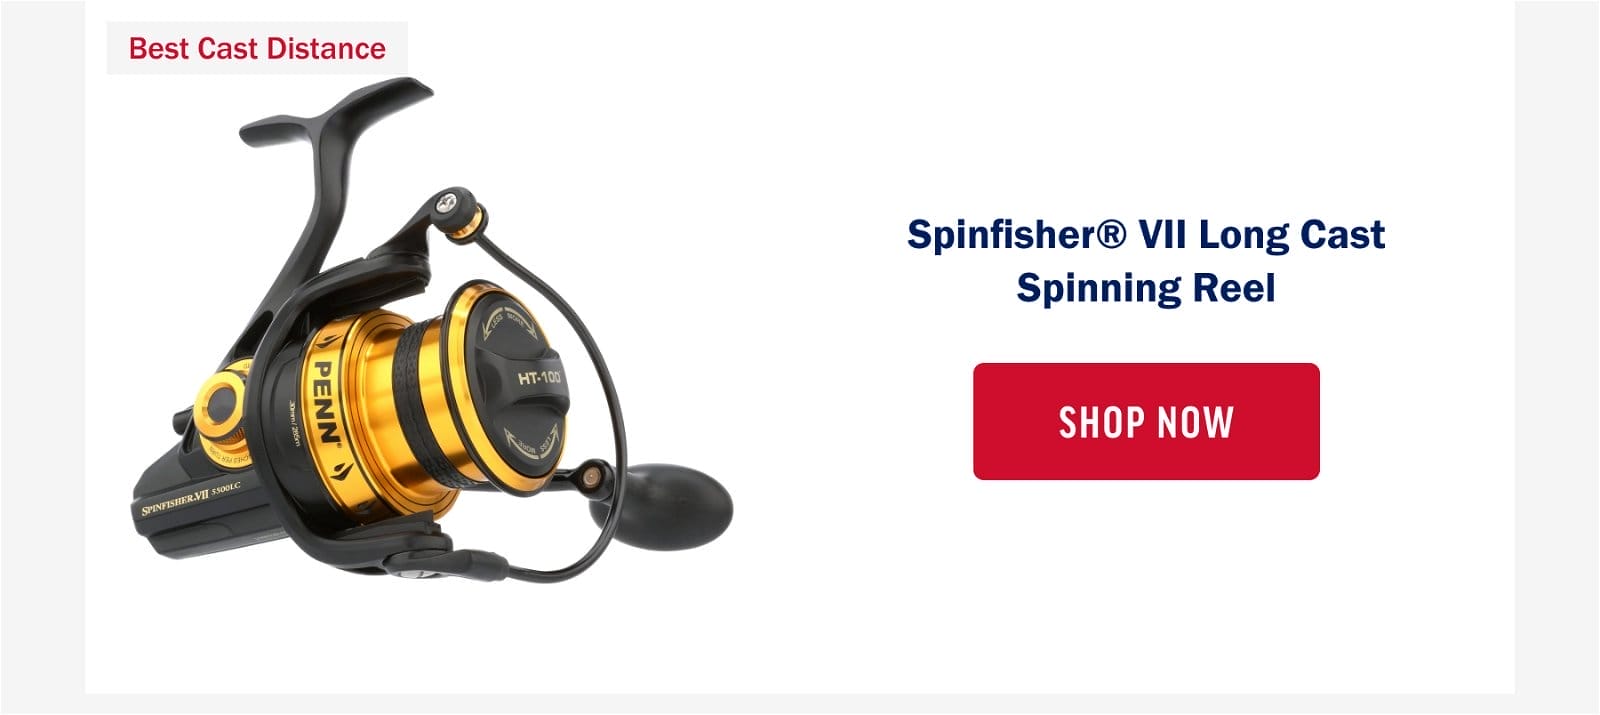 SPINFISHER® VII LONG CAST SPINNING REEL